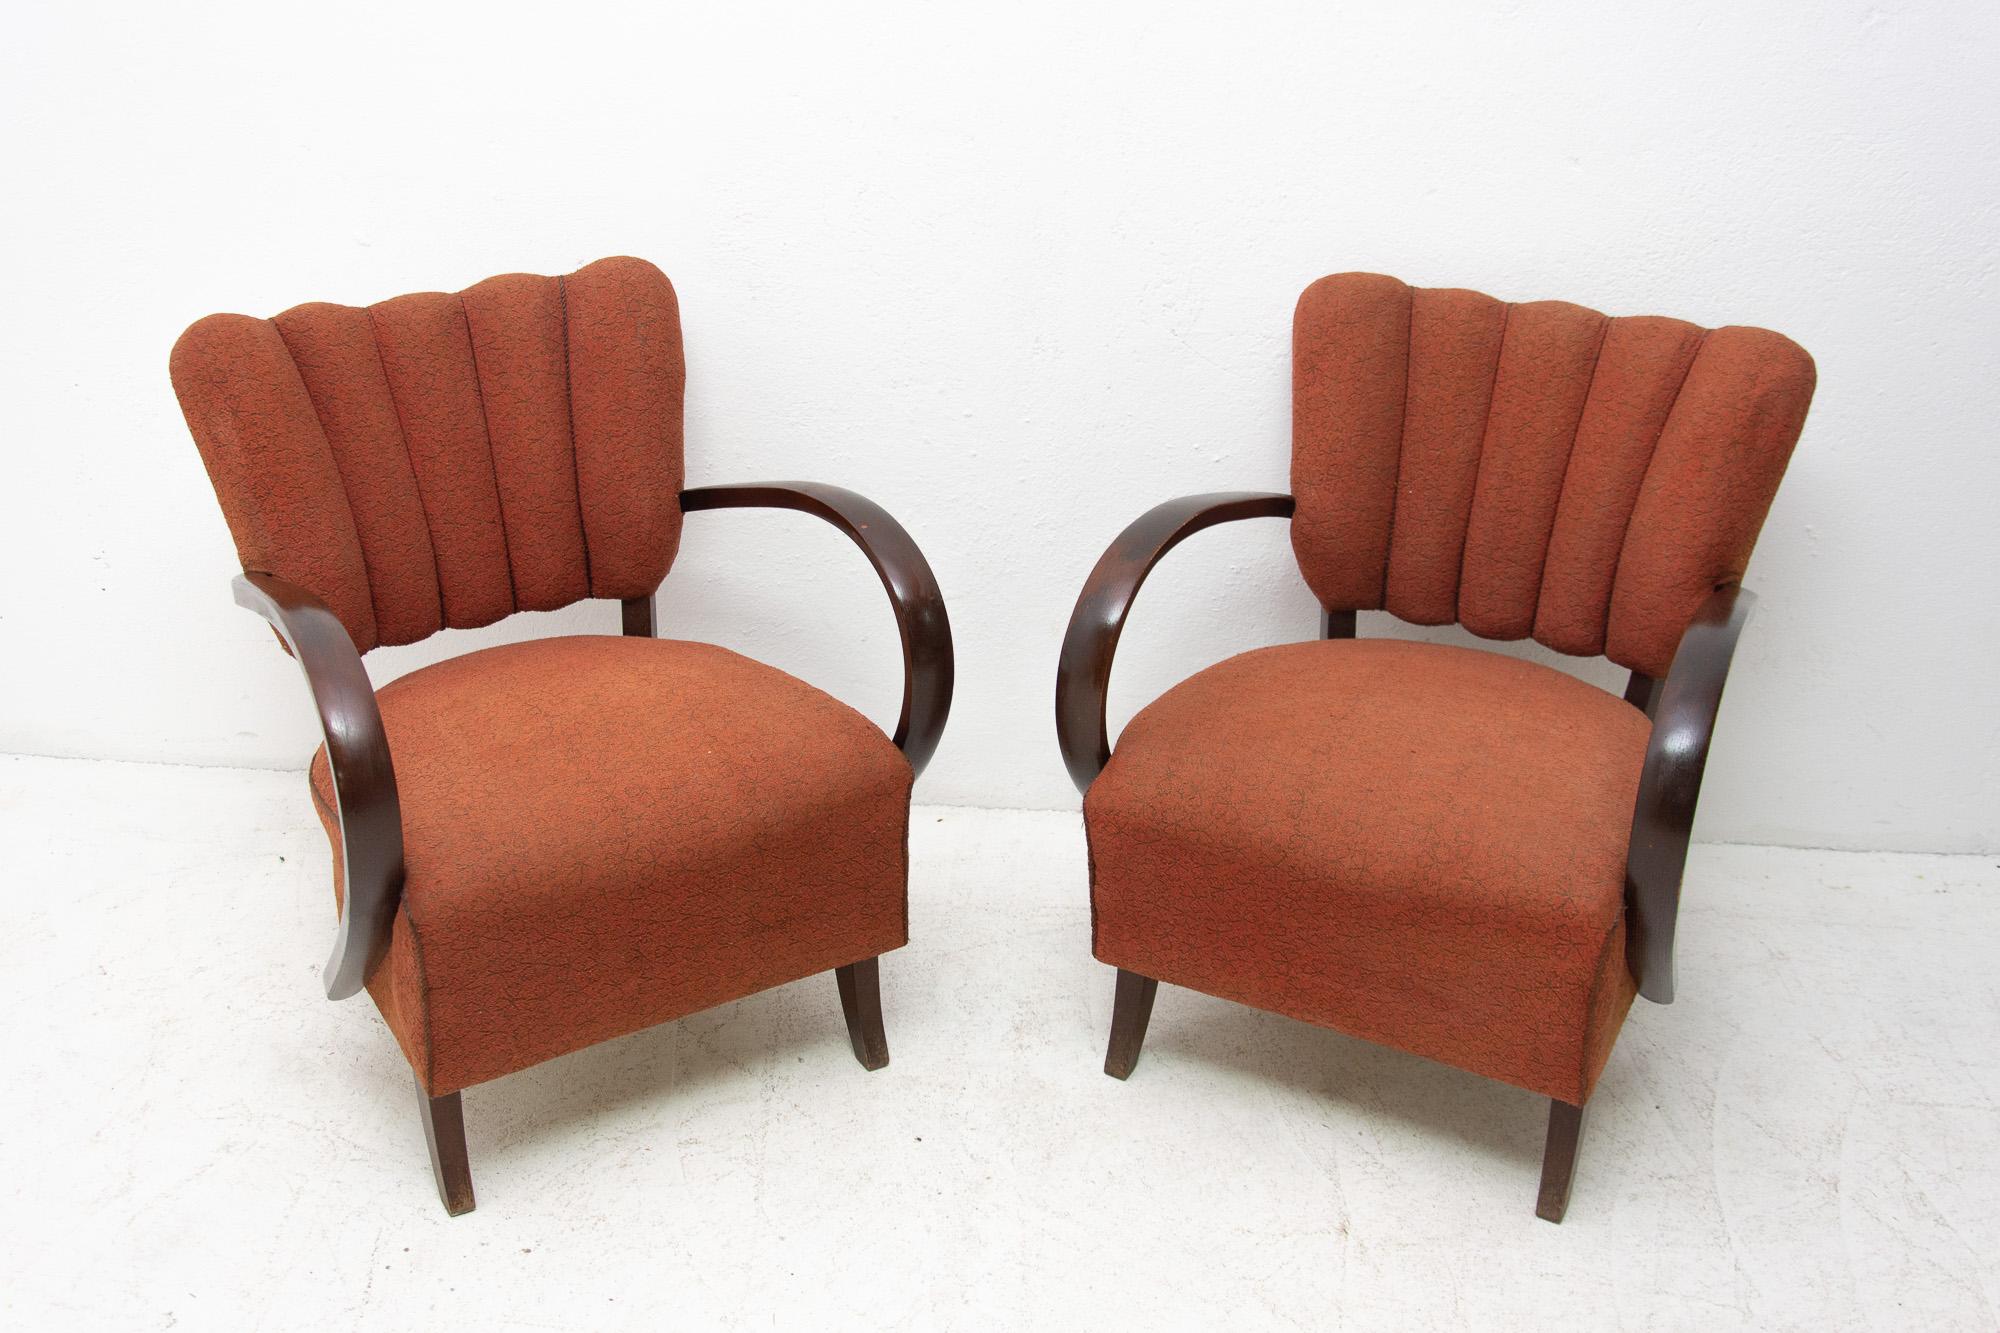 Pair of “cocktail” armchairs Catalog No. H-237 designed by Jindrich Halabala. Made in Czechoslovakia in the 1950s. Very interestingly shaped chair. It features a dark stained beech wood structure and original upholstery. The chairs are in good